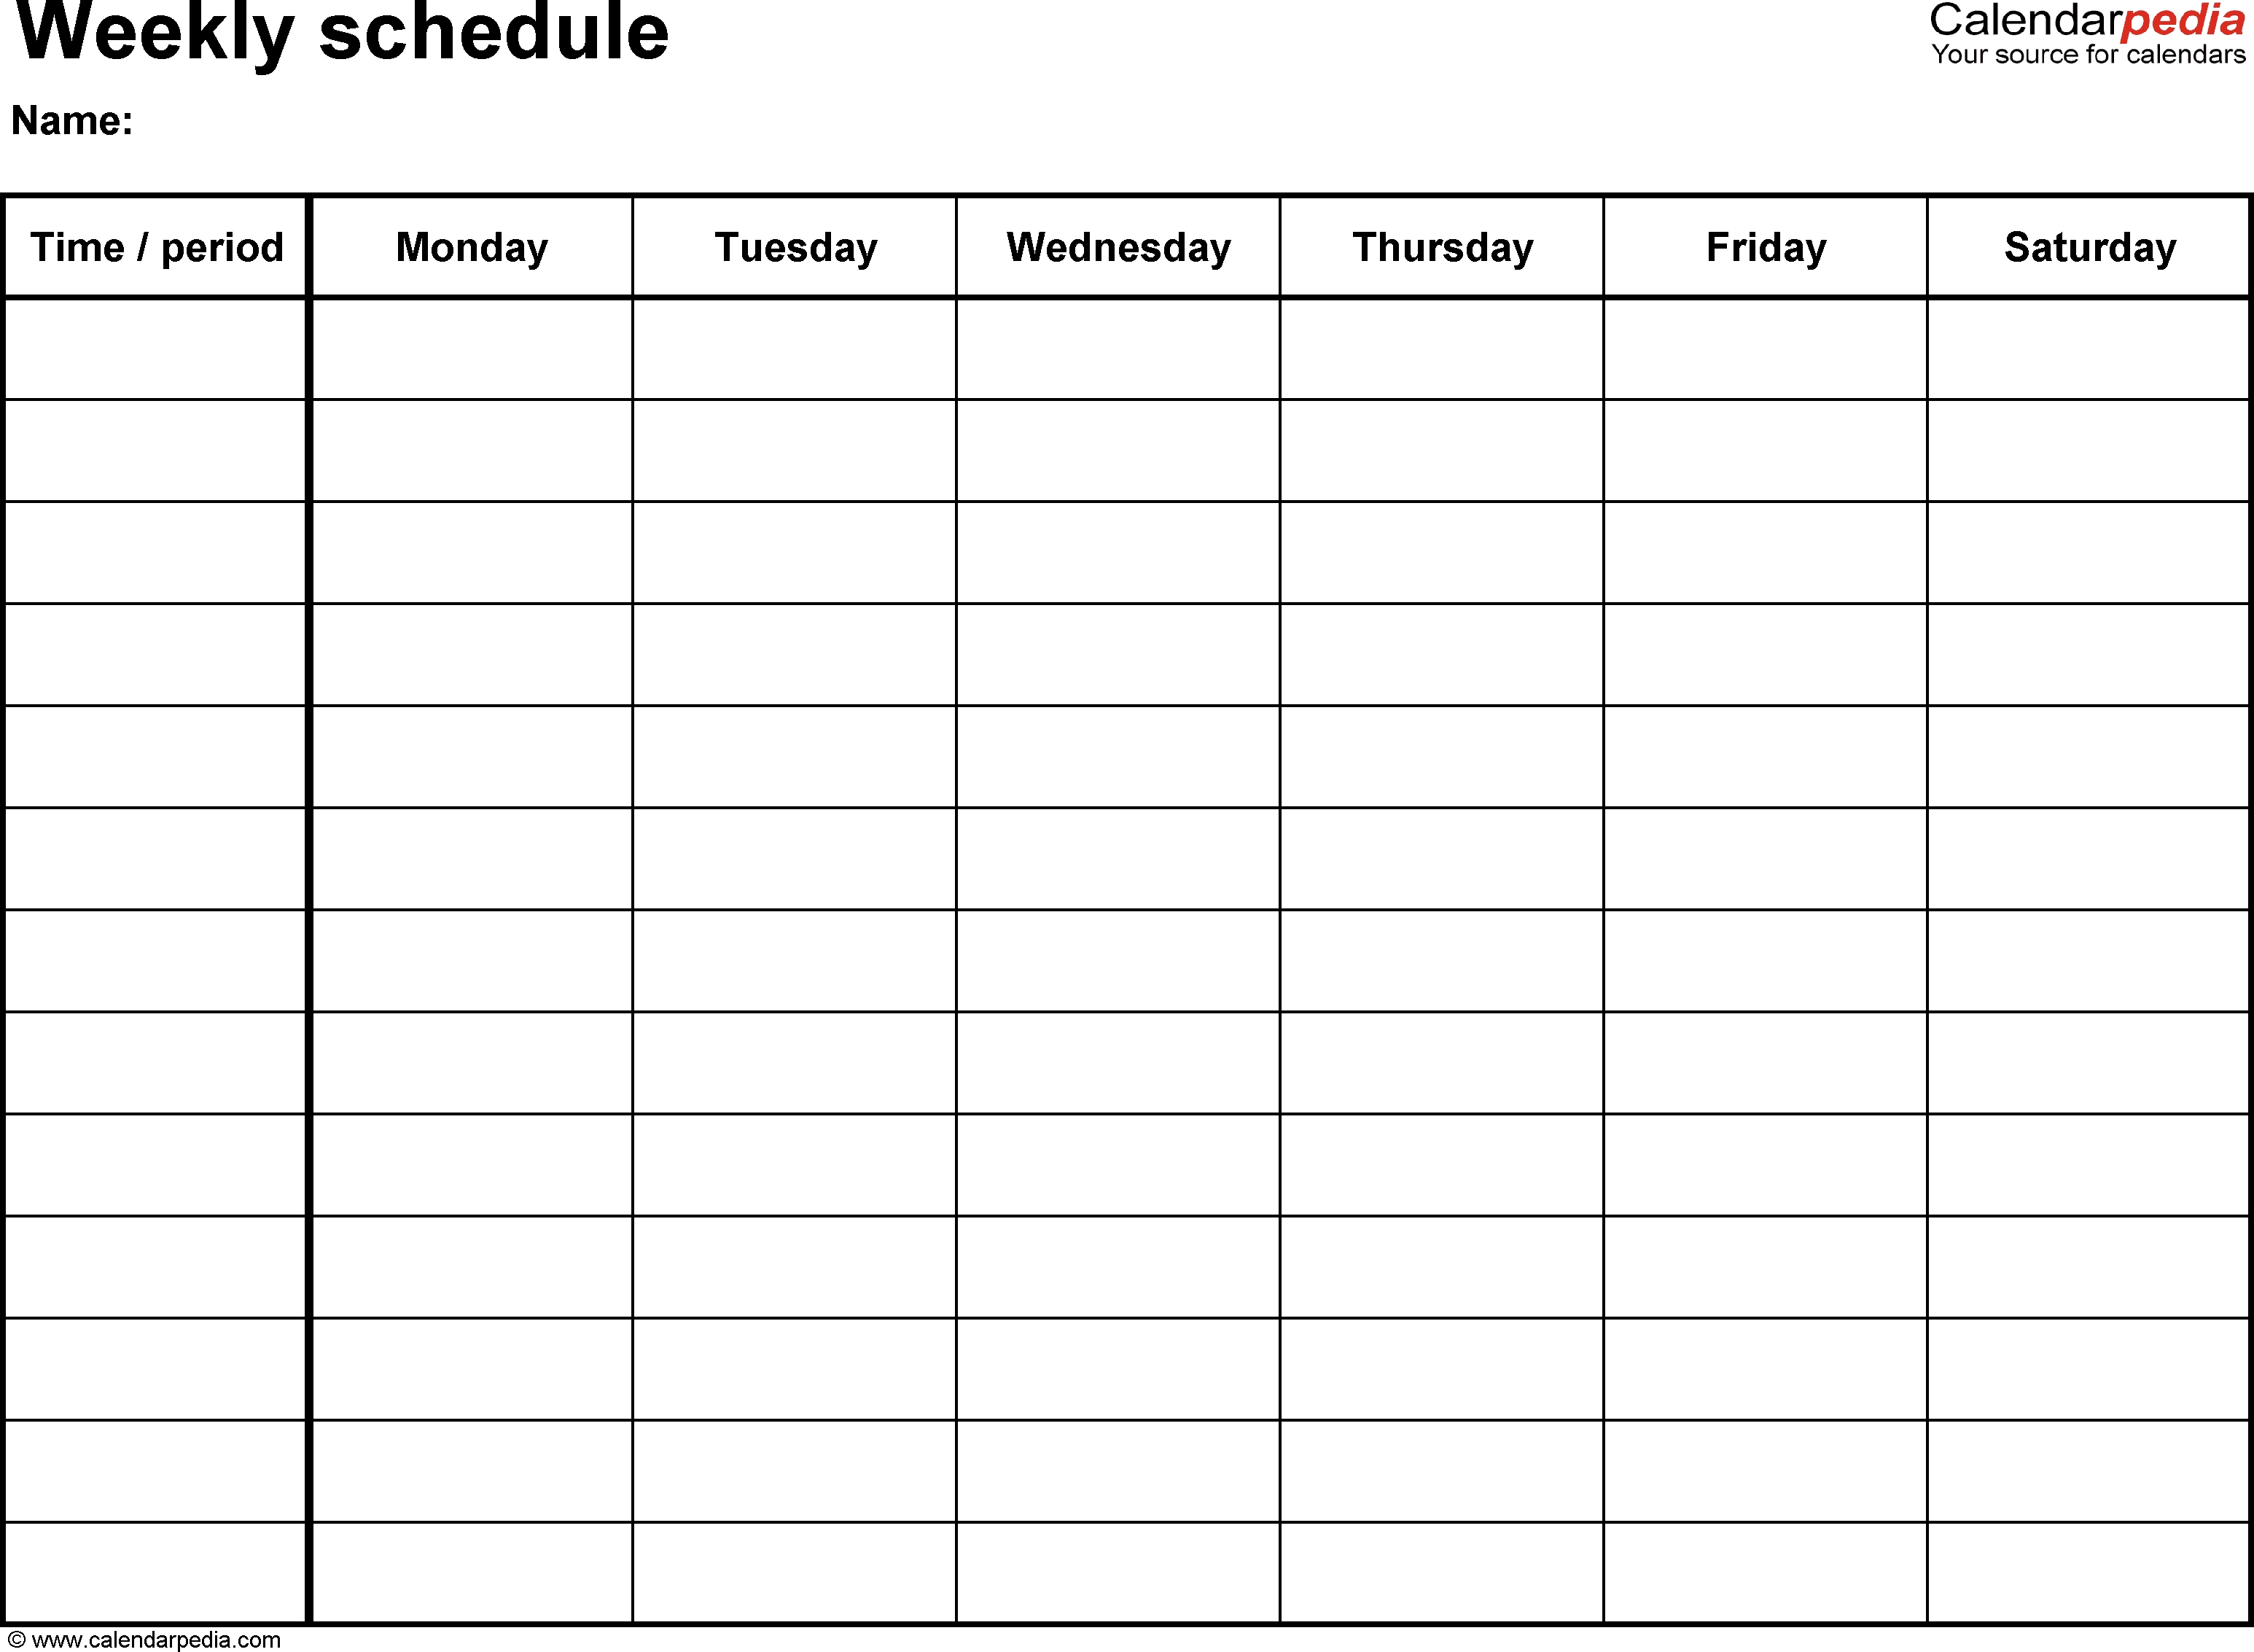 Free Weekly Schedule Templates For Pdf - 18 Templates throughout Printable Blank Weekly Calendar With Times